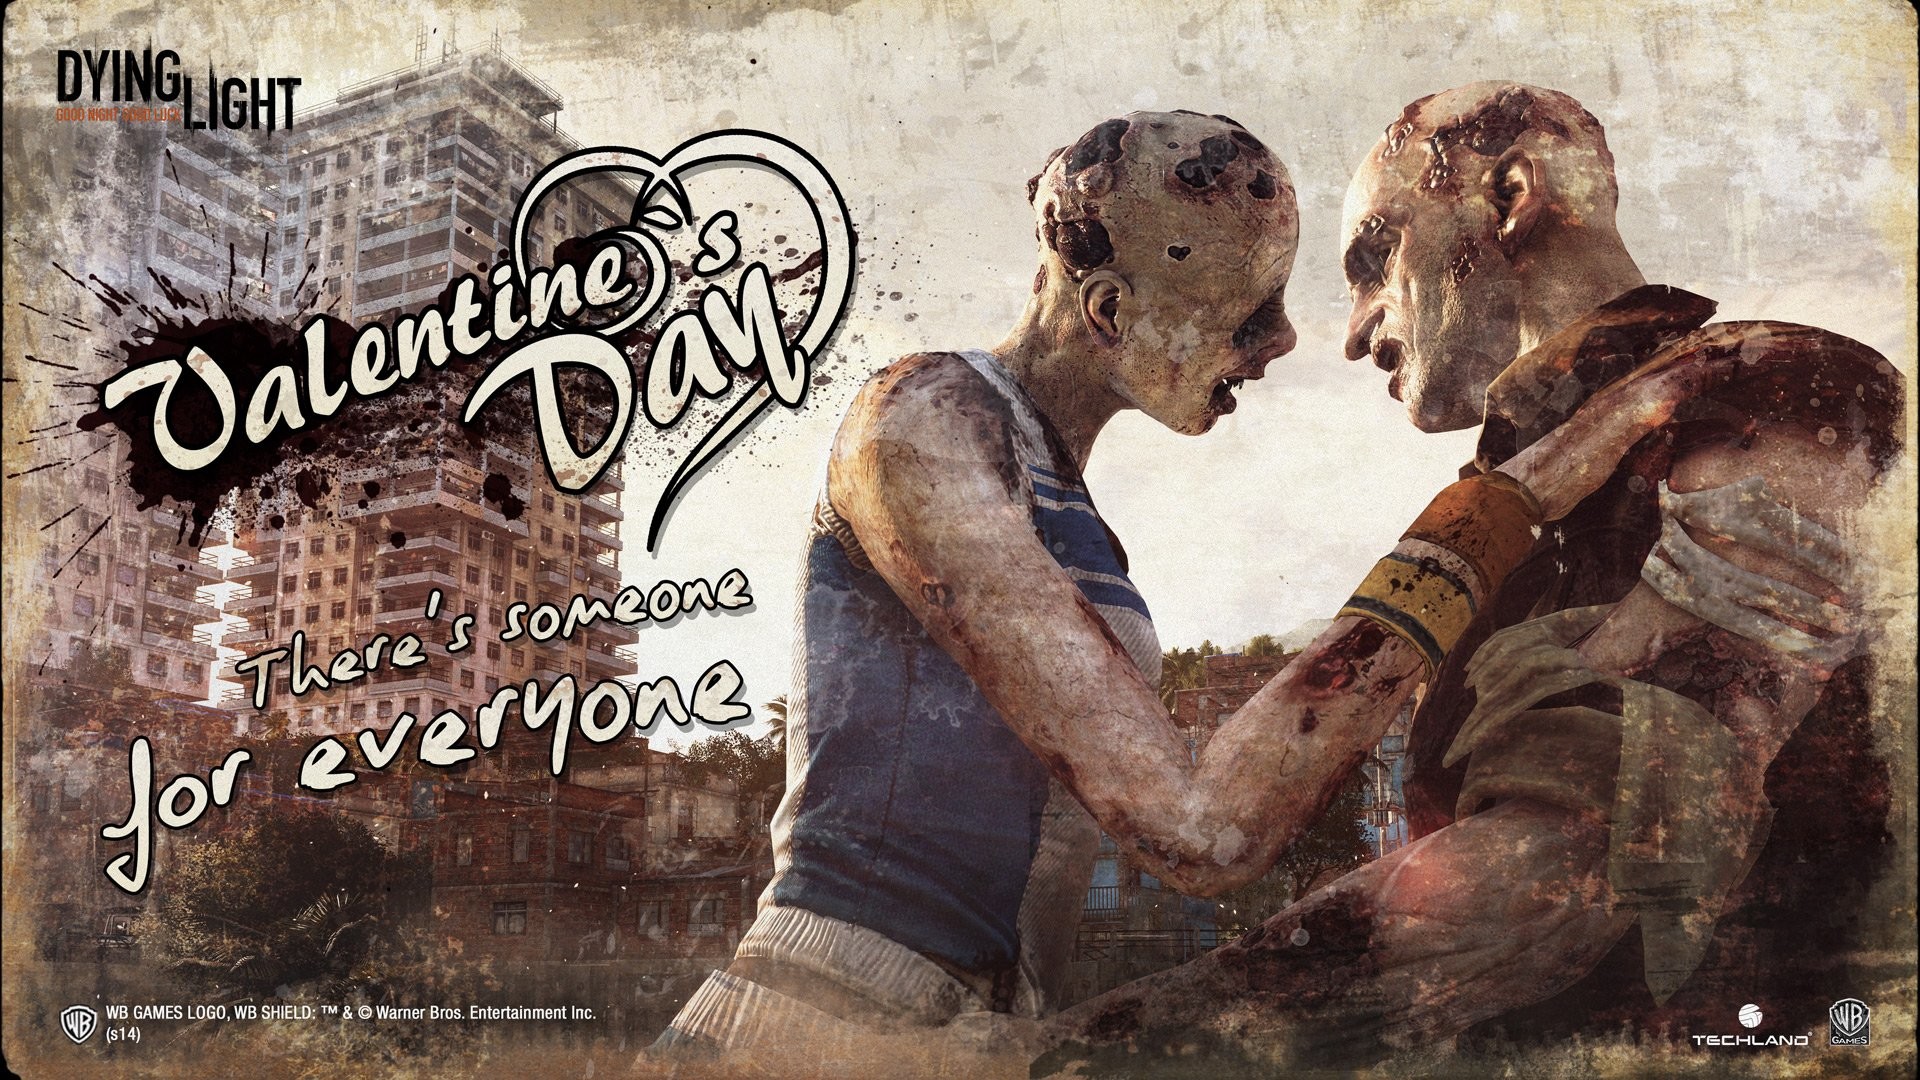 1920x1080 DYING LIGHT horror survival zombie apocalyptic dark action 1dlight rpg  poster wallpaper |  | 617128 | WallpaperUP